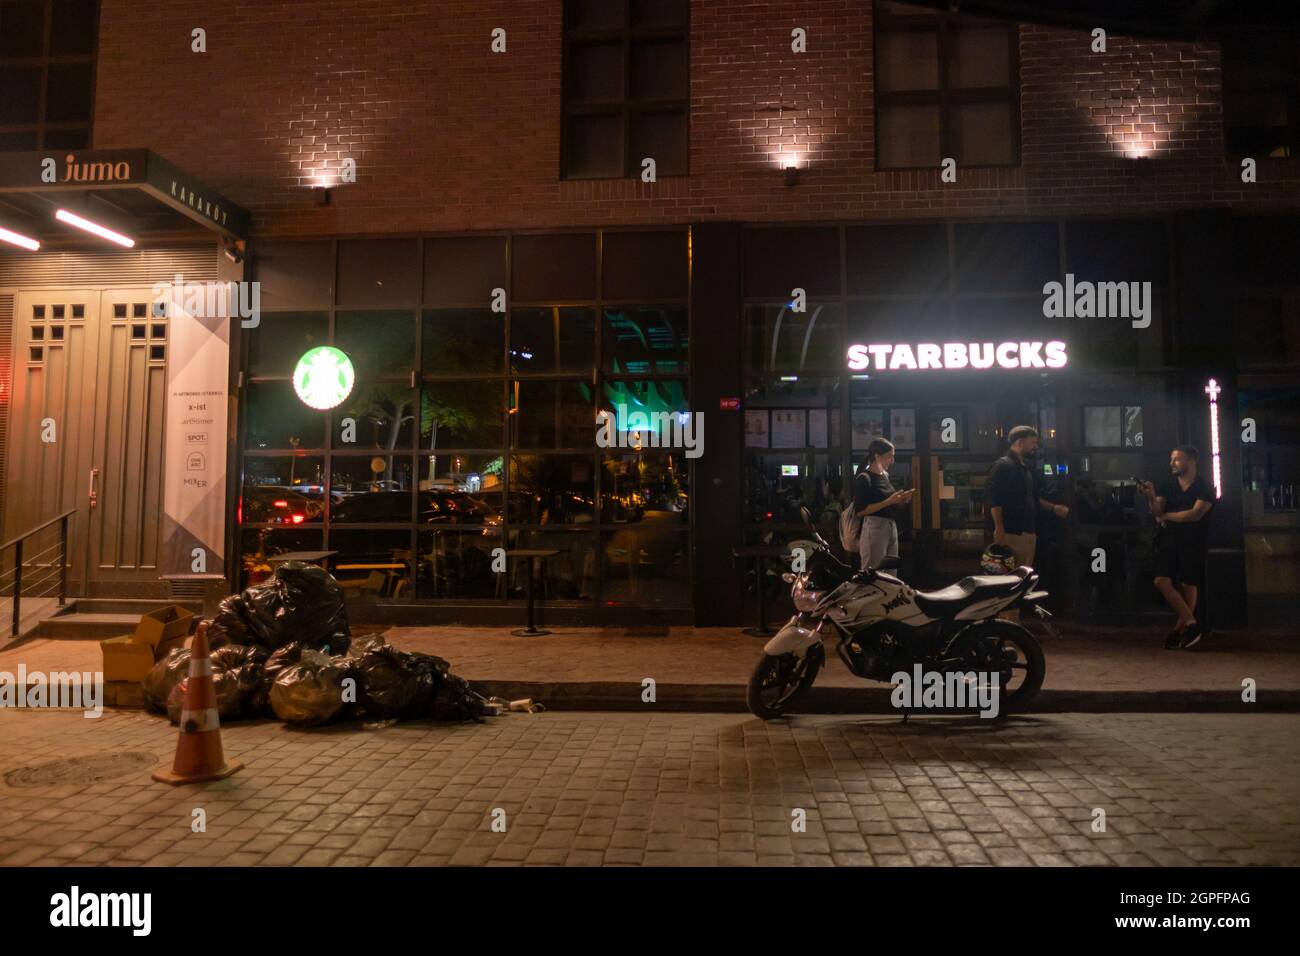 Beyoglu, Istanbul, Turkey - 07.07.2021: personnel of Starbucks at Karakoy region closing the coffee shop at night and going home for restaurant famous Stock Photo